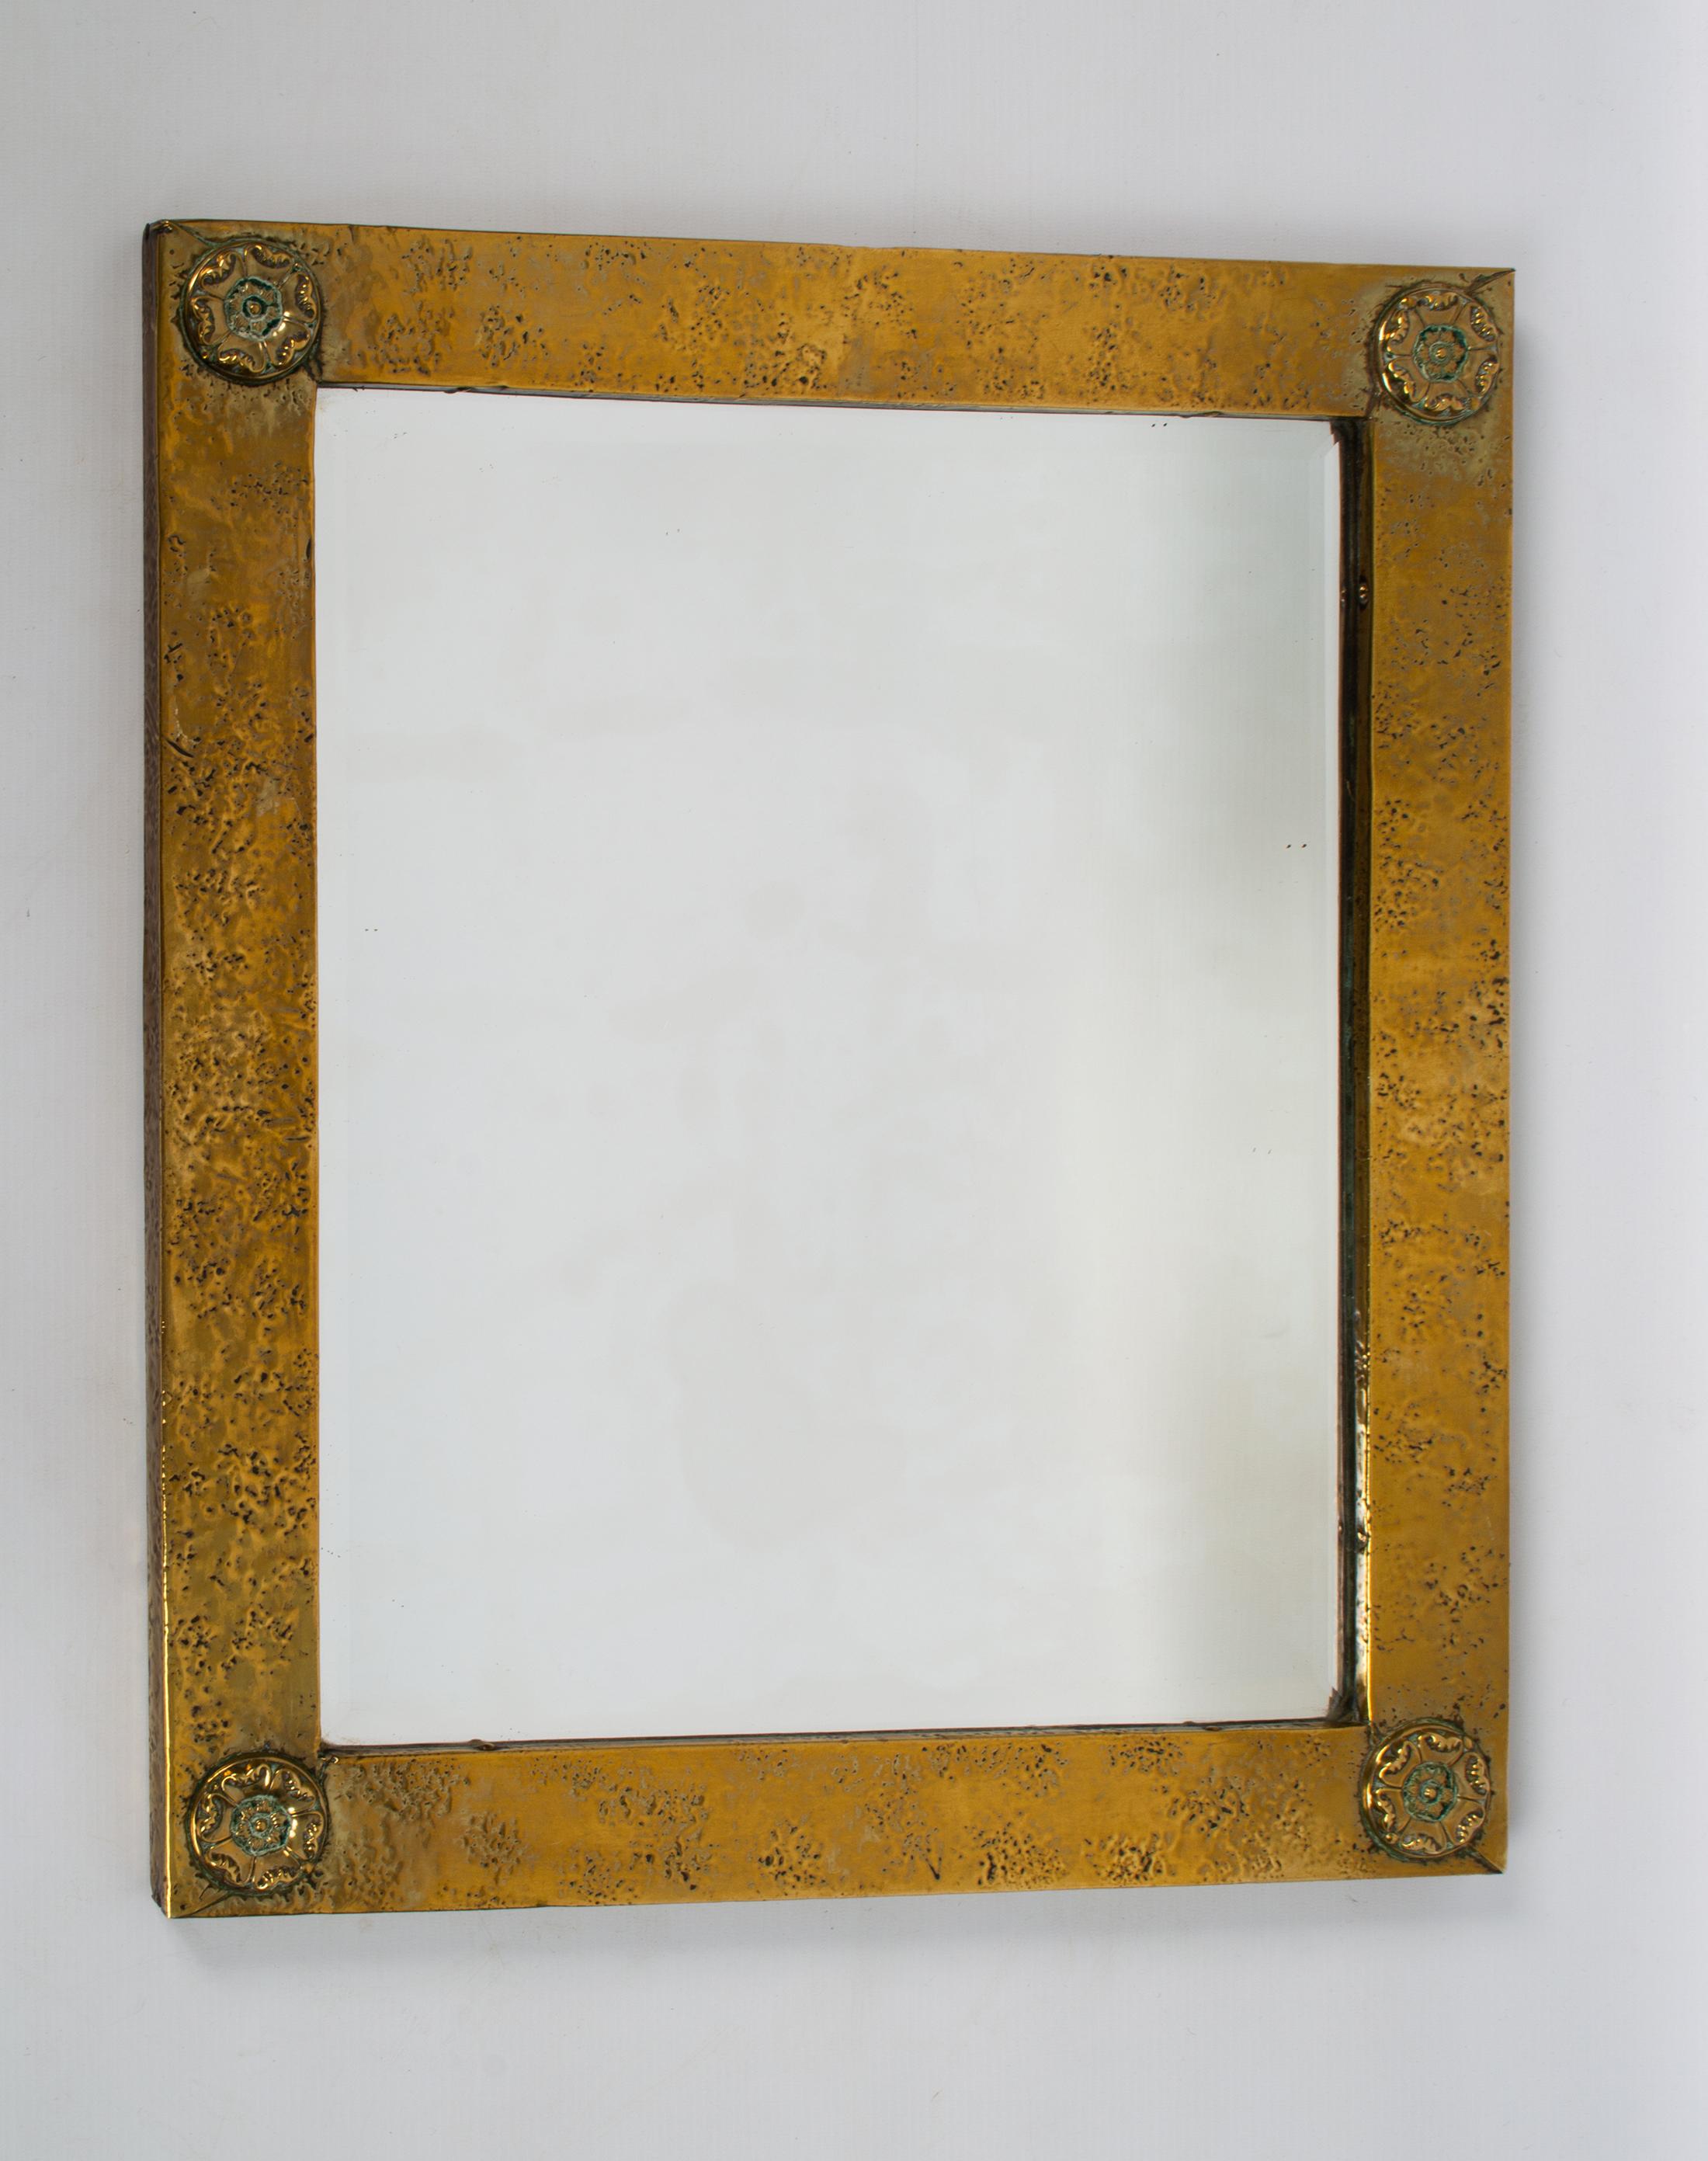 Antique English Arts And Crafts Polished brass mirror Liberty and Co London
C.1900
Hammered brass frame, bevelled mirror (good condition, no foxing).

Presented in excellent condition commensurate with age.